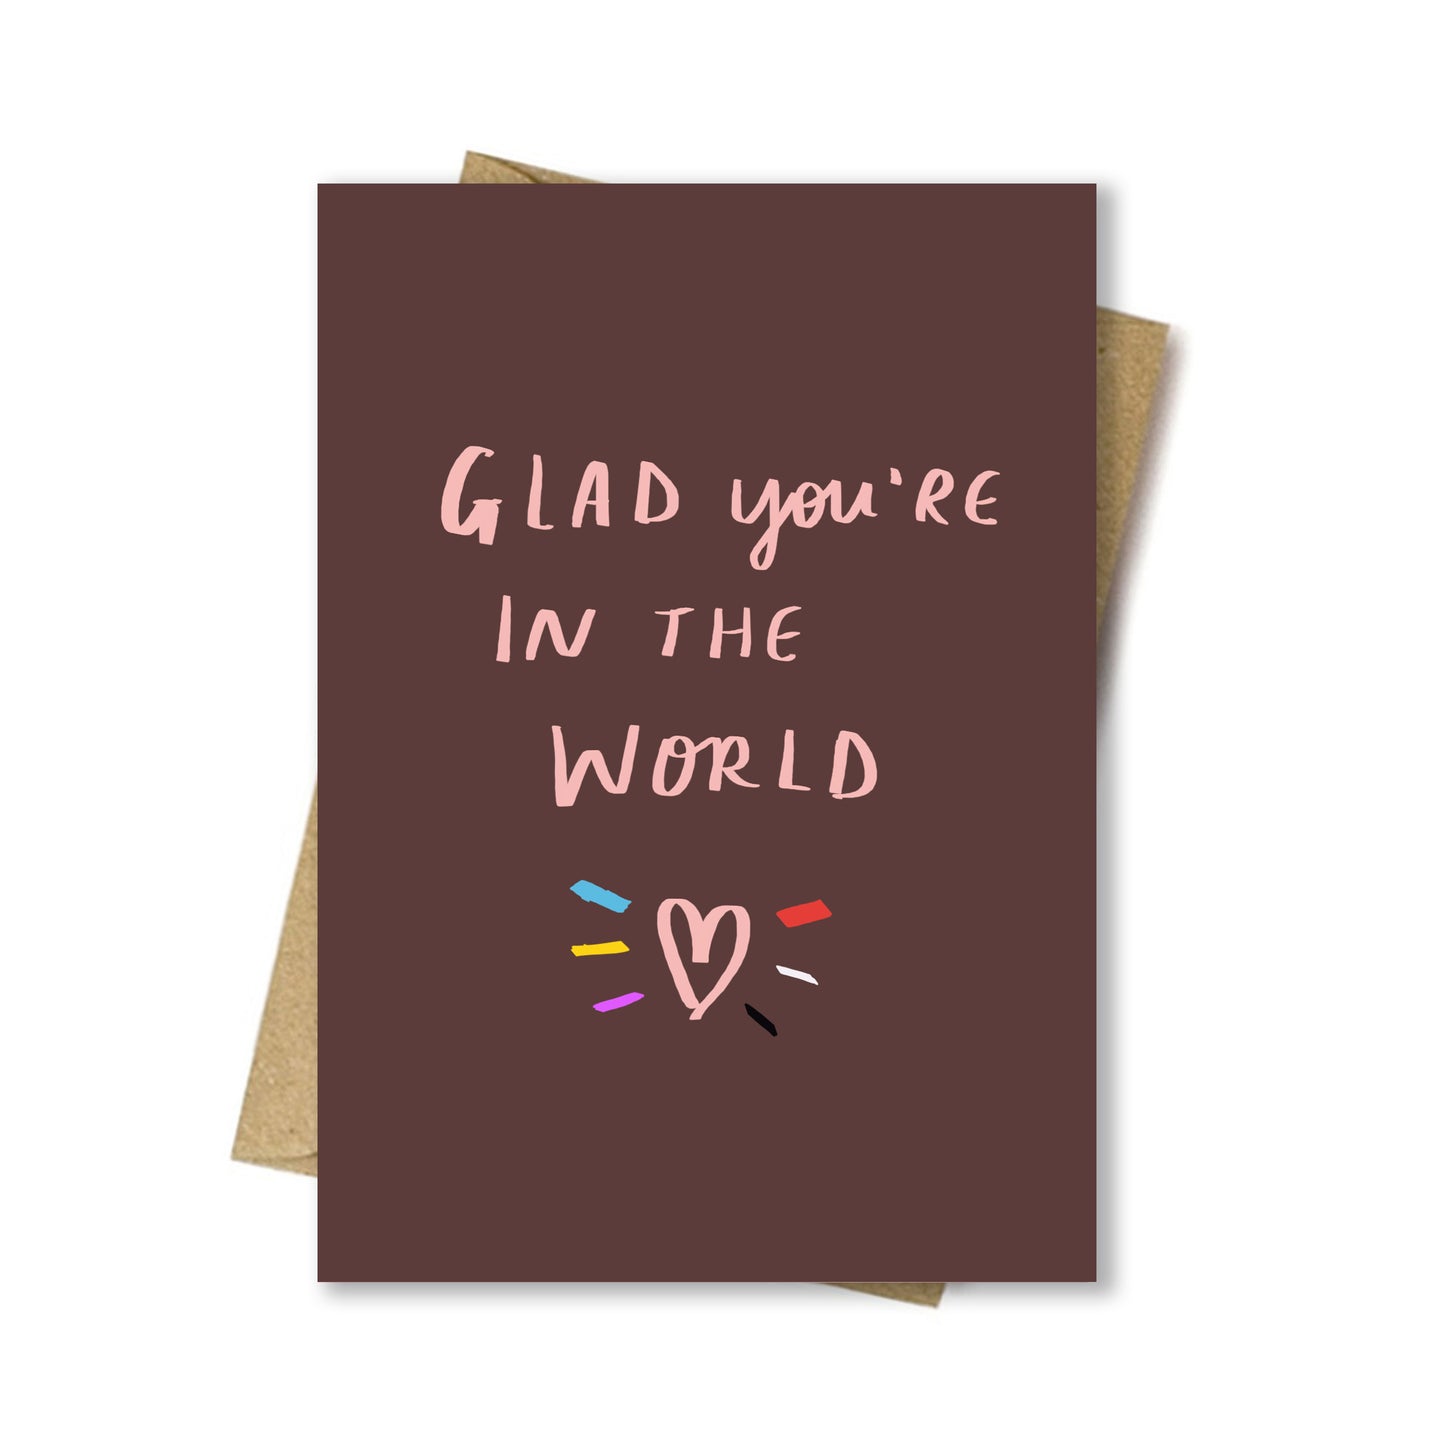 Glad you're in the world card